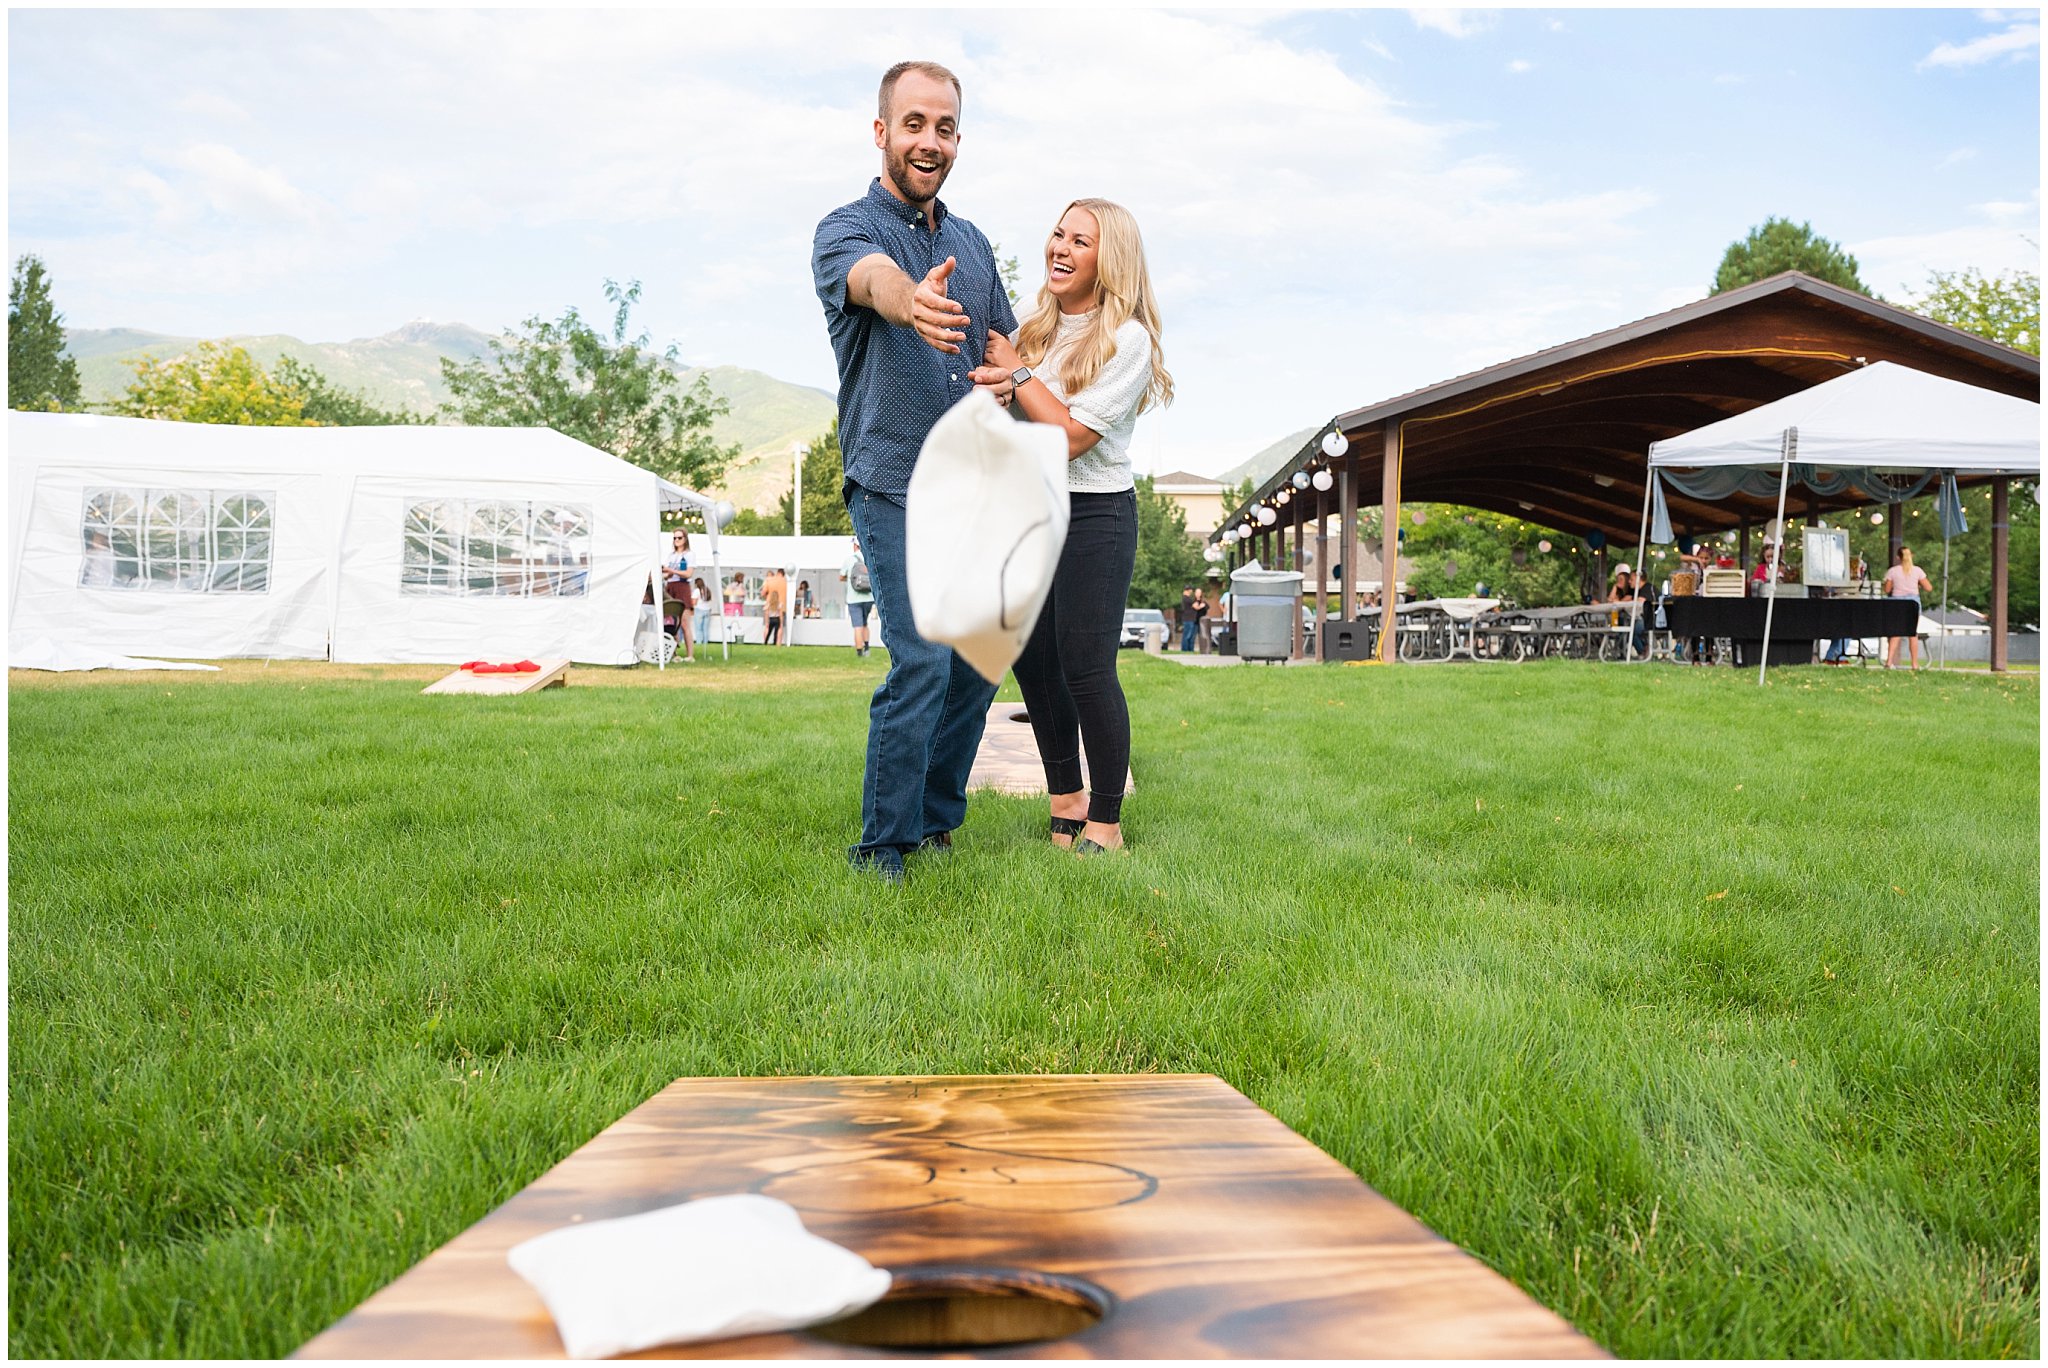 Carnival themed wedding reception outside with activities | Summer Carnival and Oquirrh Mountain Temple Wedding | Jessie and Dallin Photography